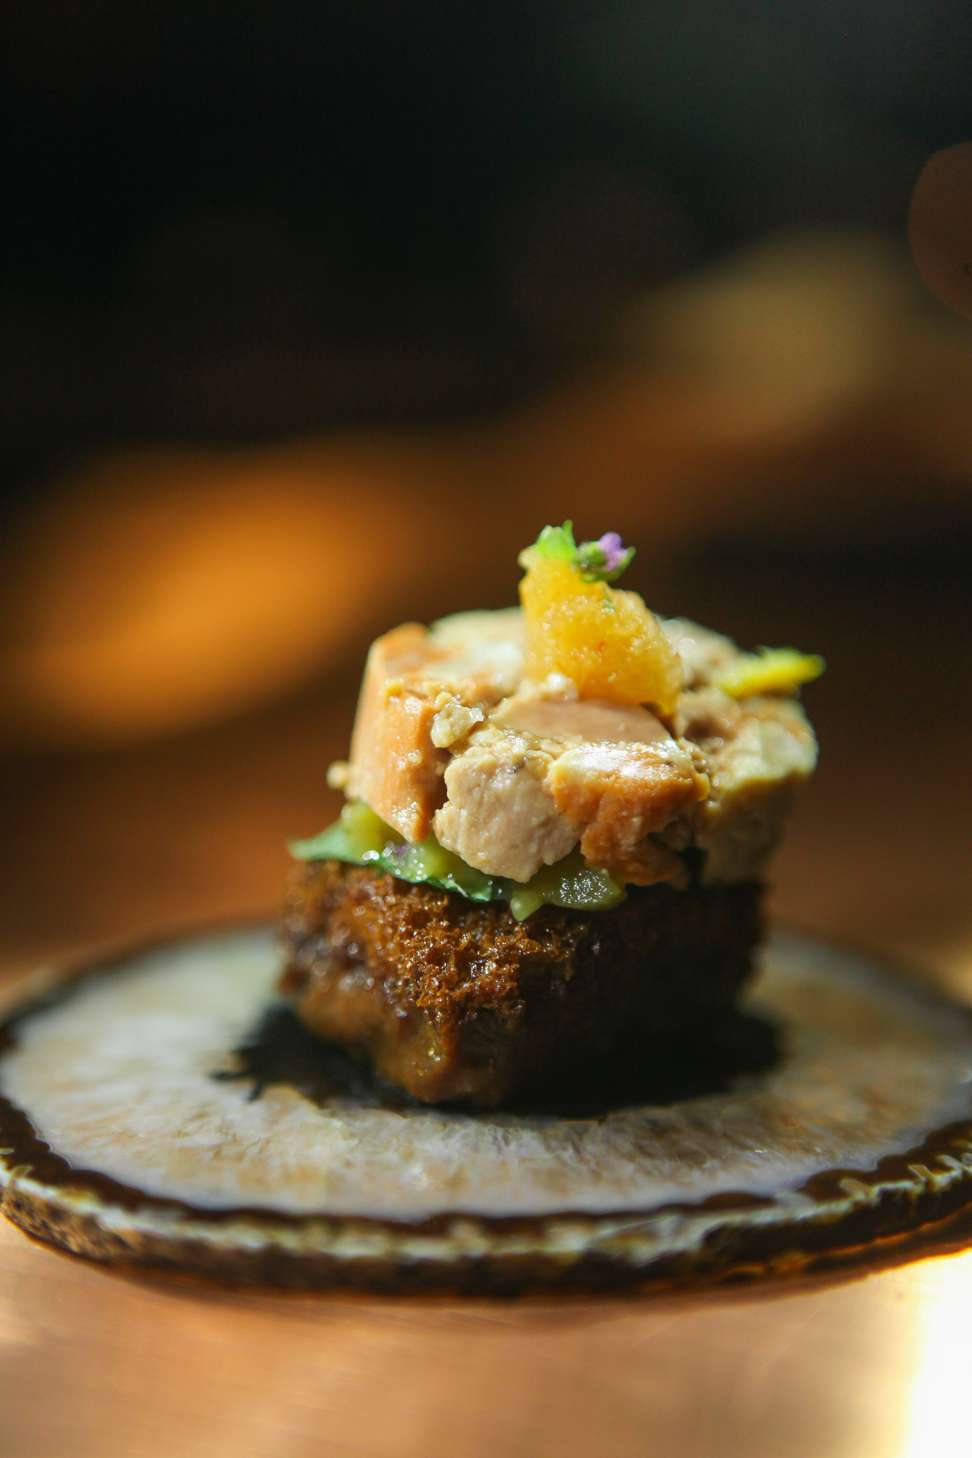 Monkfish liver and pickled eggplant on bread soaked in miso and yuzu from Mecha Uma. Photo: Harvey Tapan